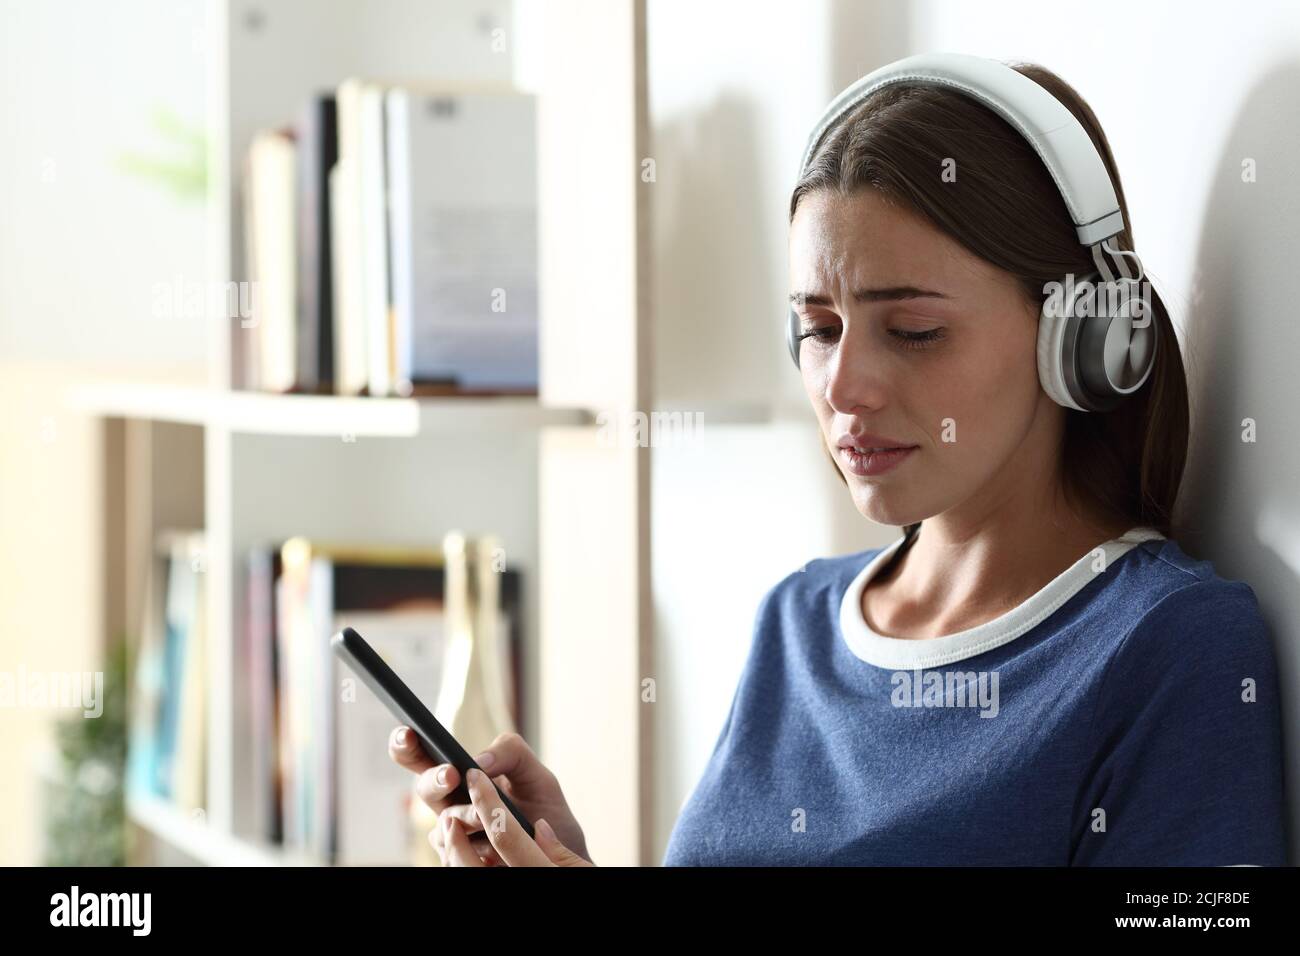 Sad teen complaining listening to music looking down and crying at home Stock Photo